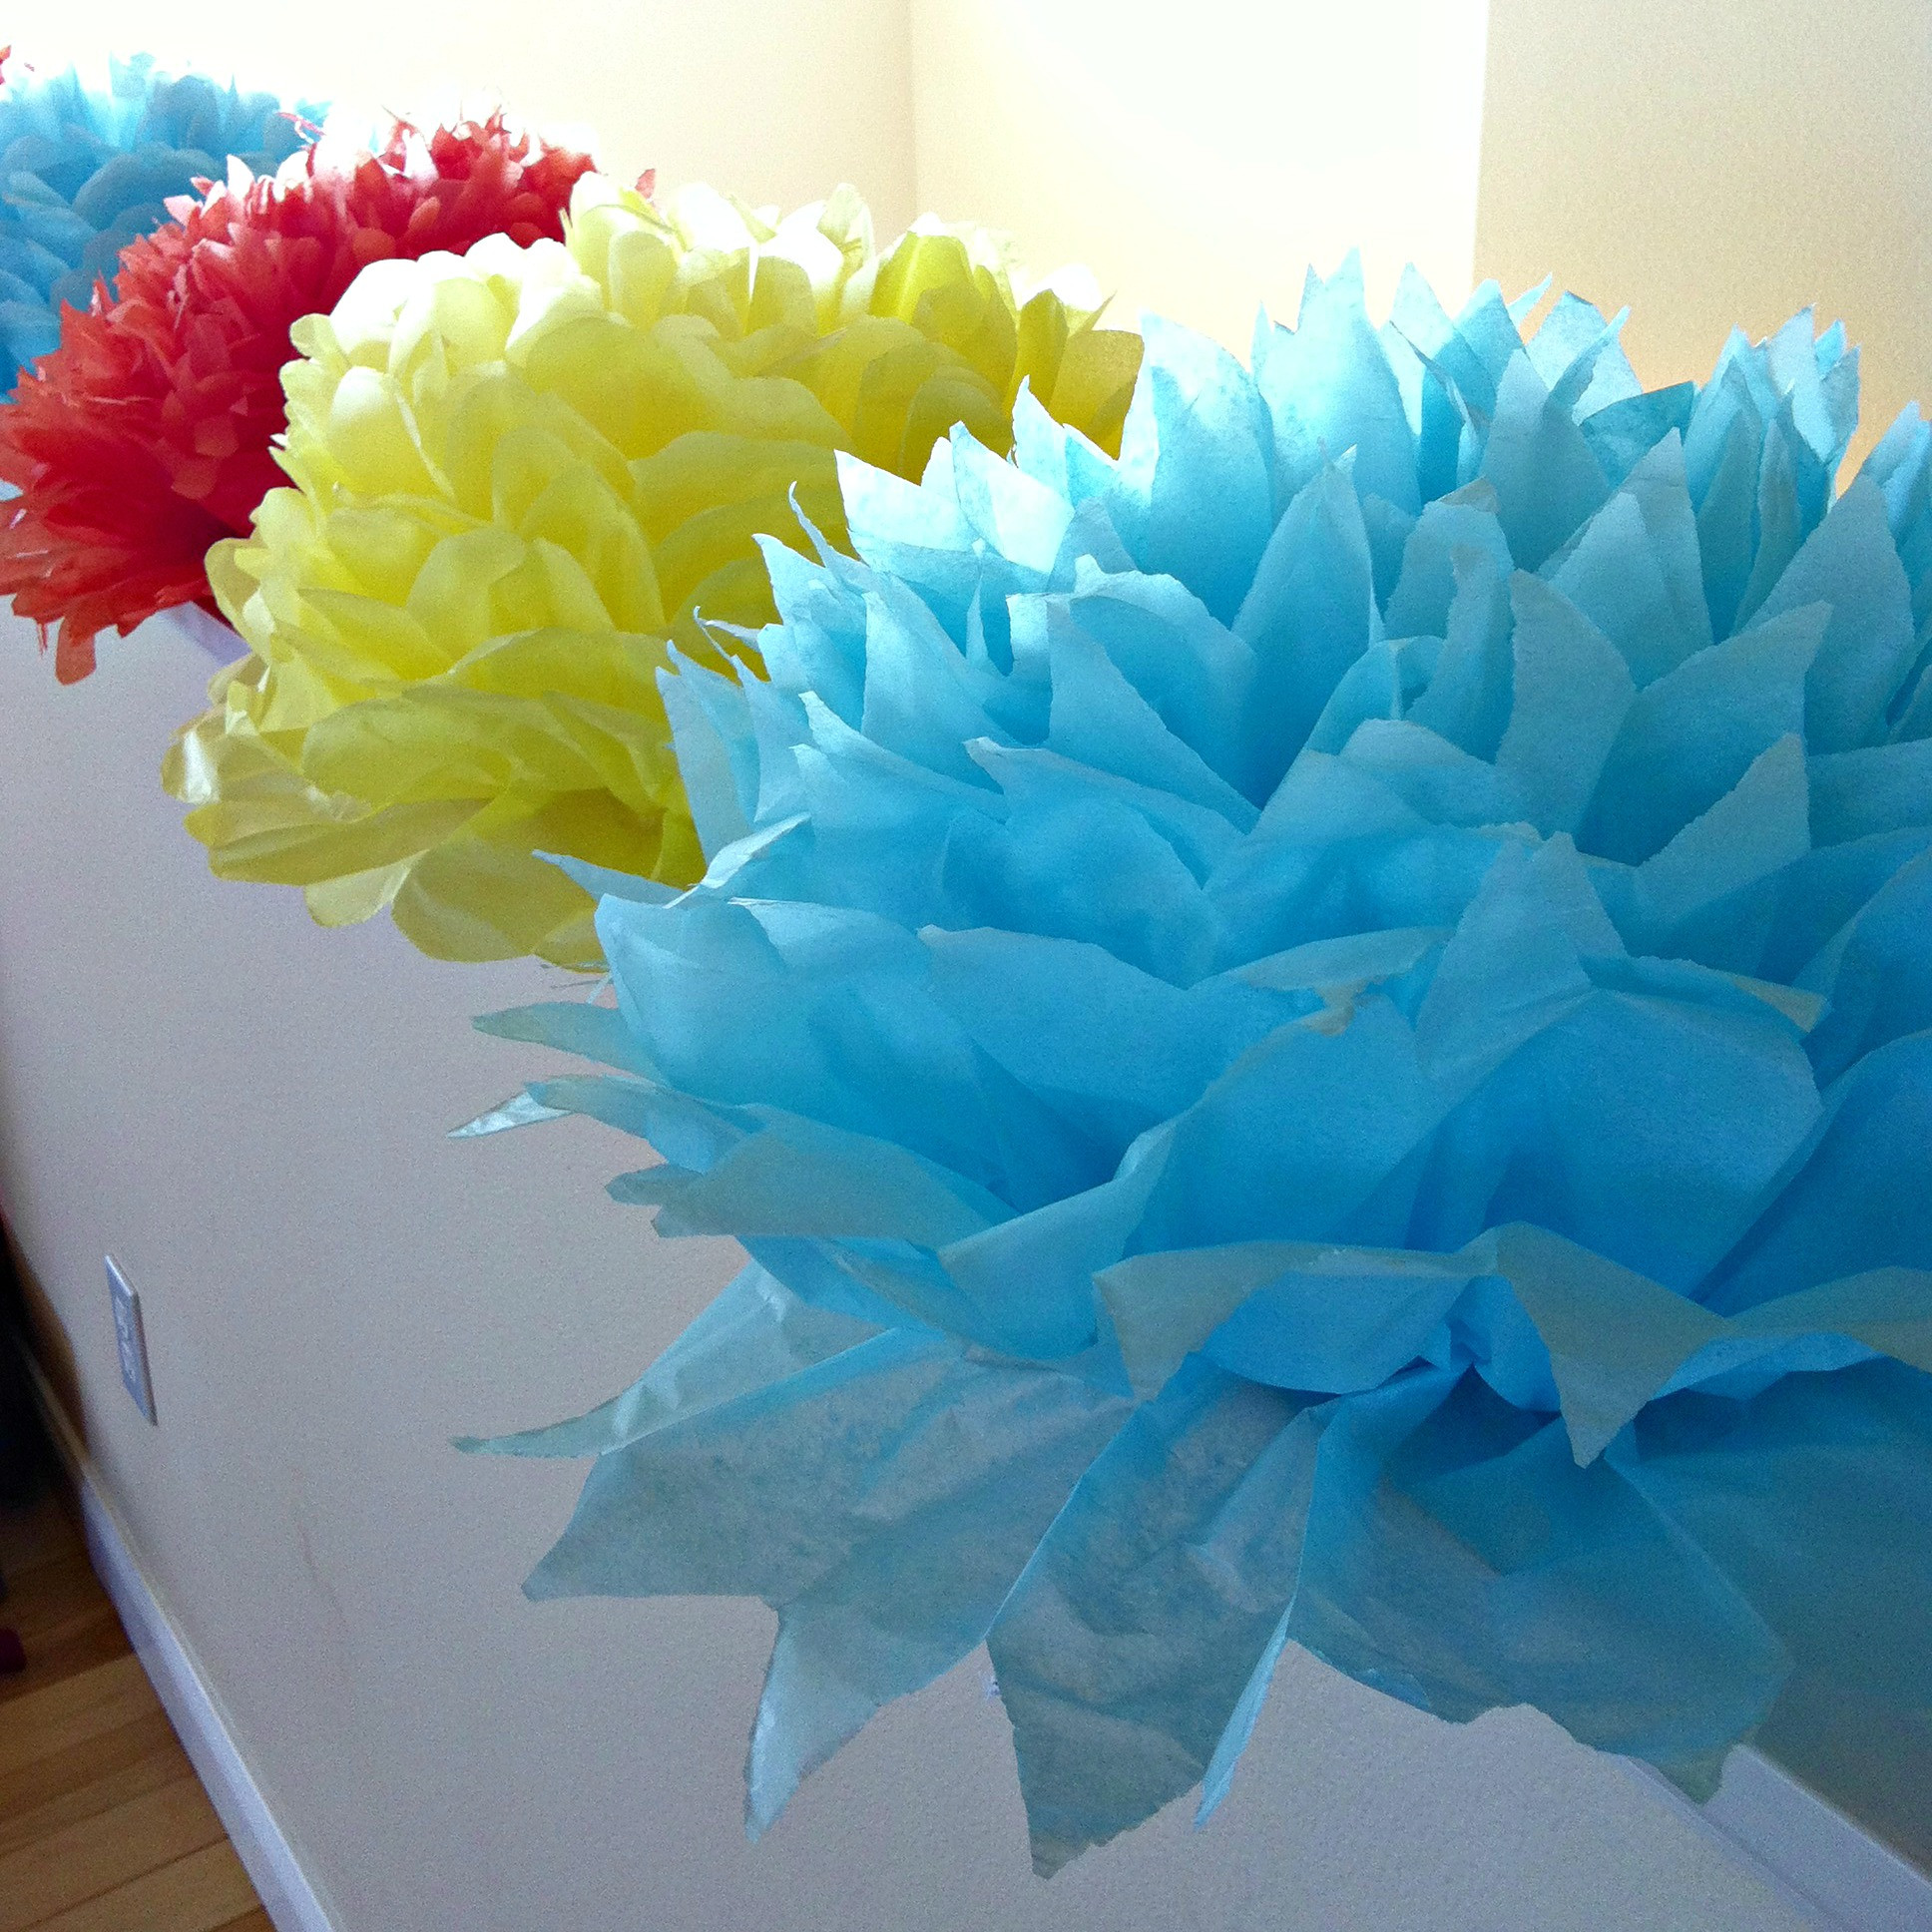 DIY Tissue Paper Decorations
 Tutorial How To Make DIY Giant Tissue Paper Flowers Sew